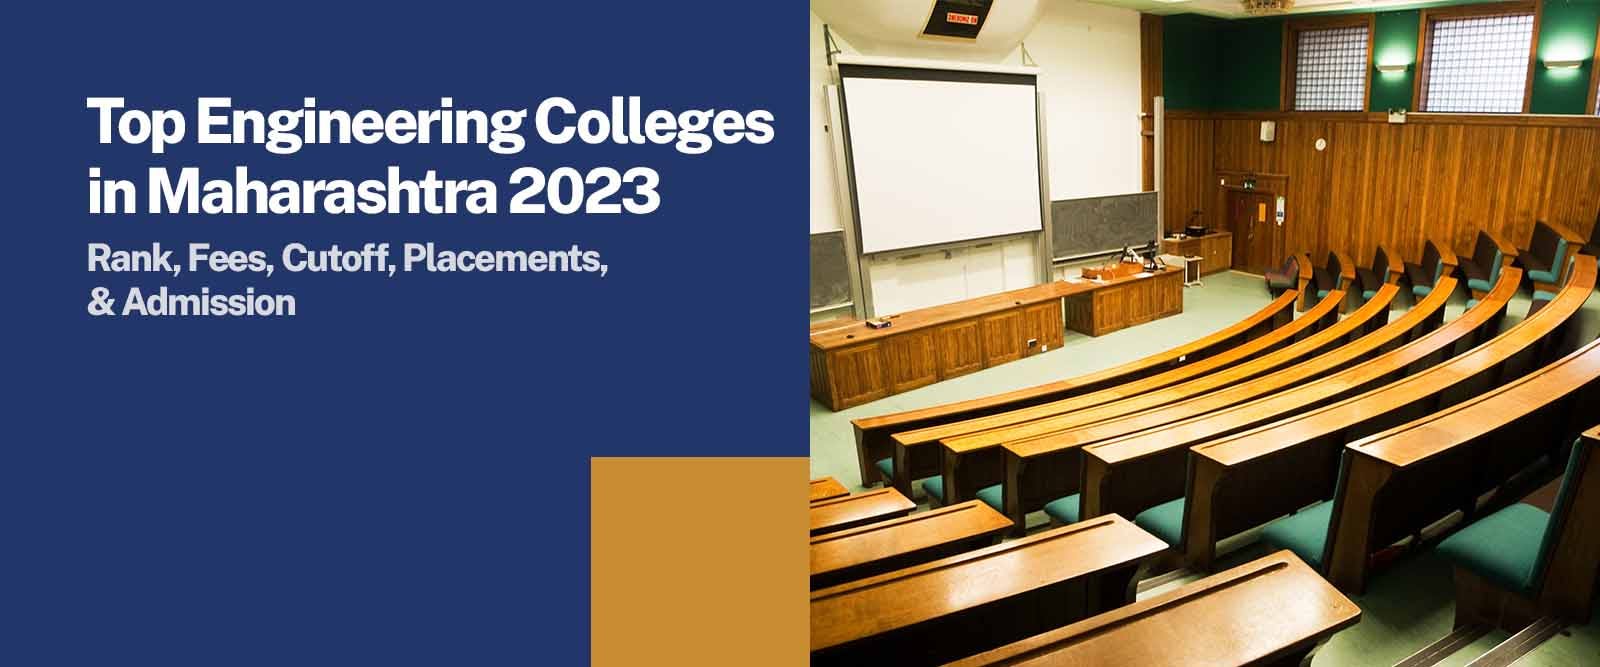 Top Engineering Colleges in Maharashtra 2023: Rank, Fees, Cutoff,  Placements, Admission